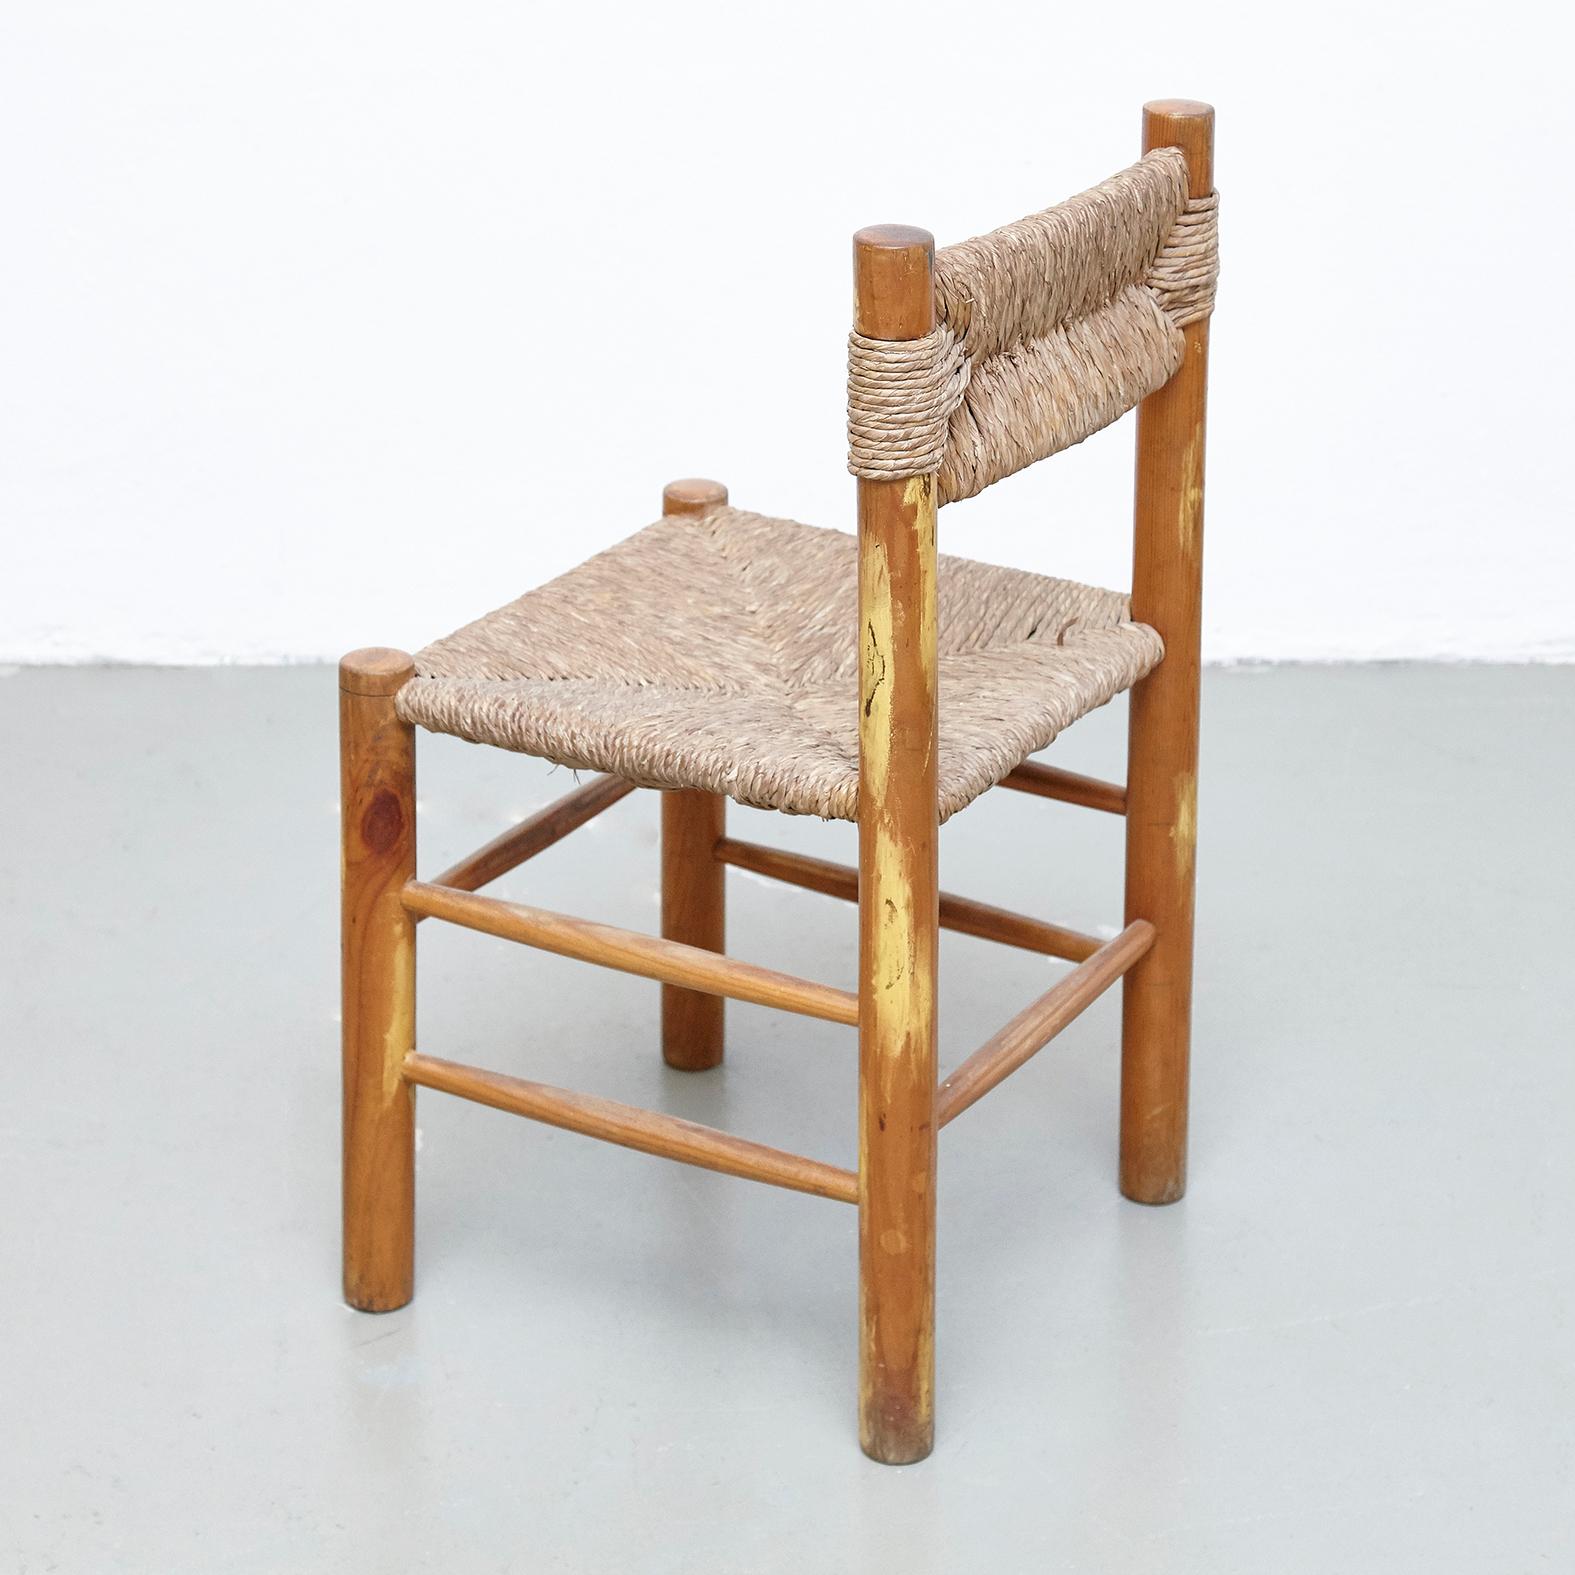 Pair of Chairs After Charlotte Perriand, Wood Rattan, Mid Century Modern 2